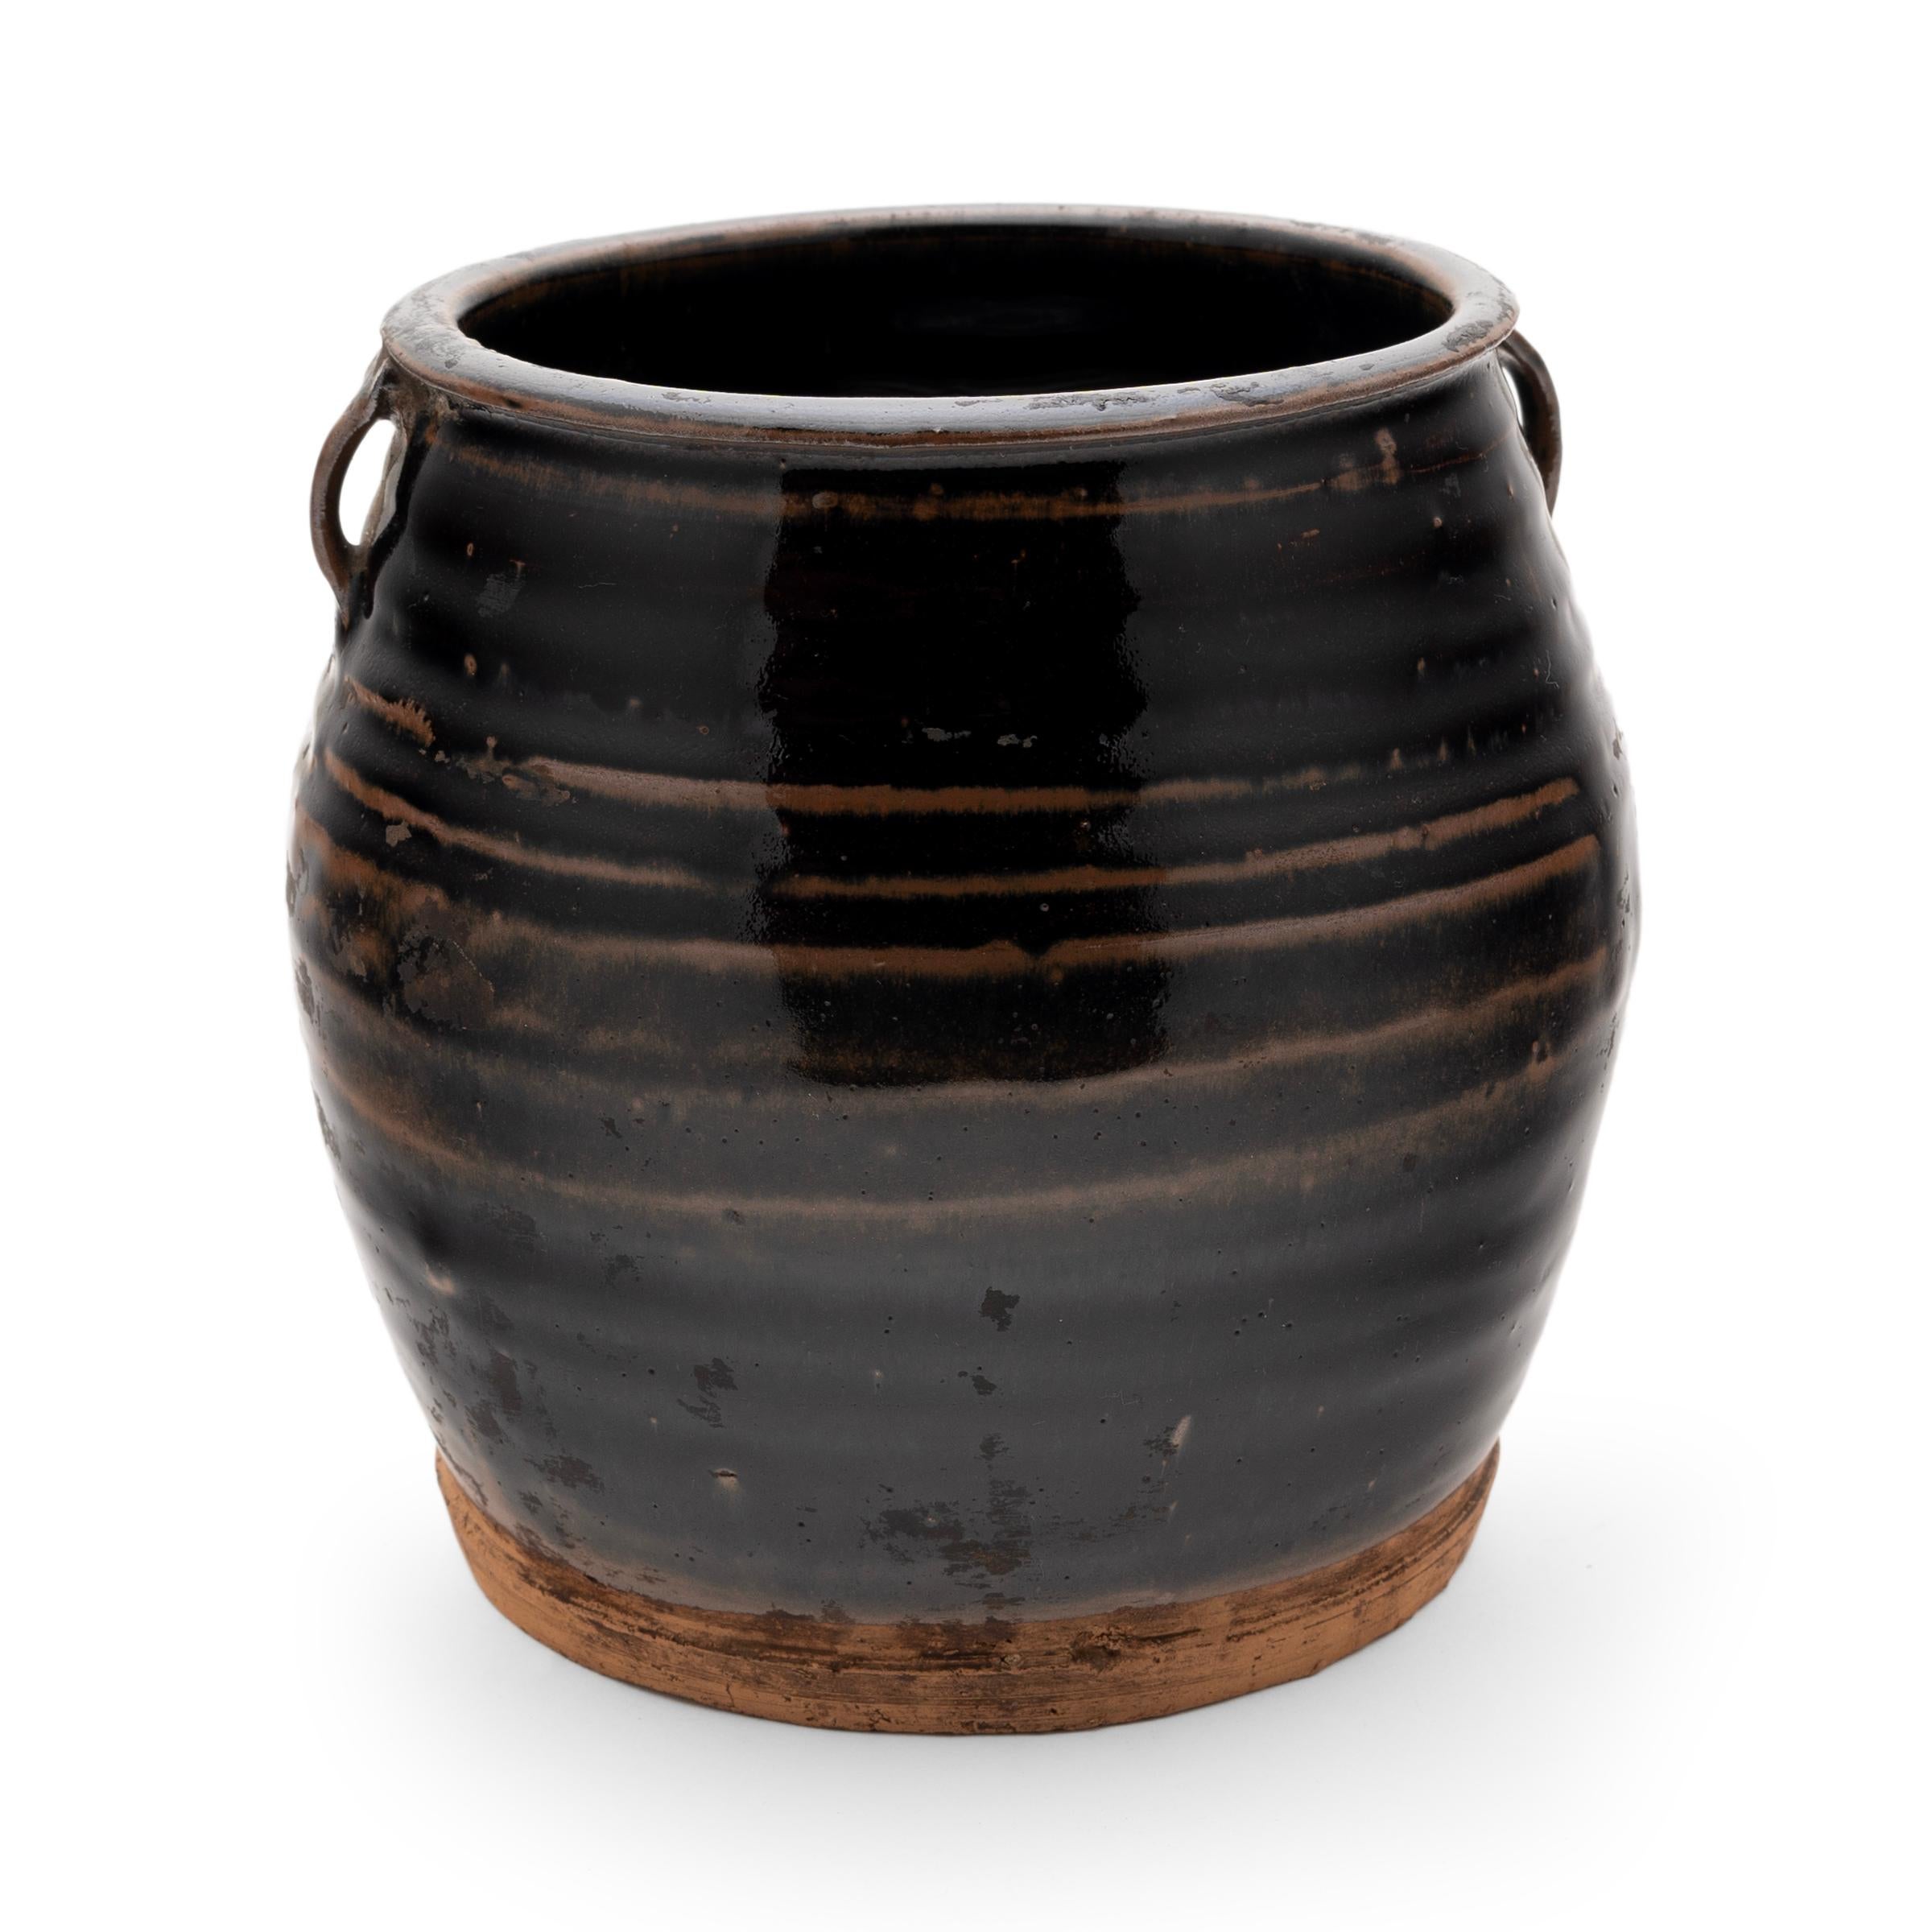 A thin black glaze coats the stout body of this early 20th-century terra cotta kitchen jar. As evidenced by the glazed interior, this wide-mouth jar was once used daily in a provincial Chinese kitchen for fermenting foods and condiments. The kitchen